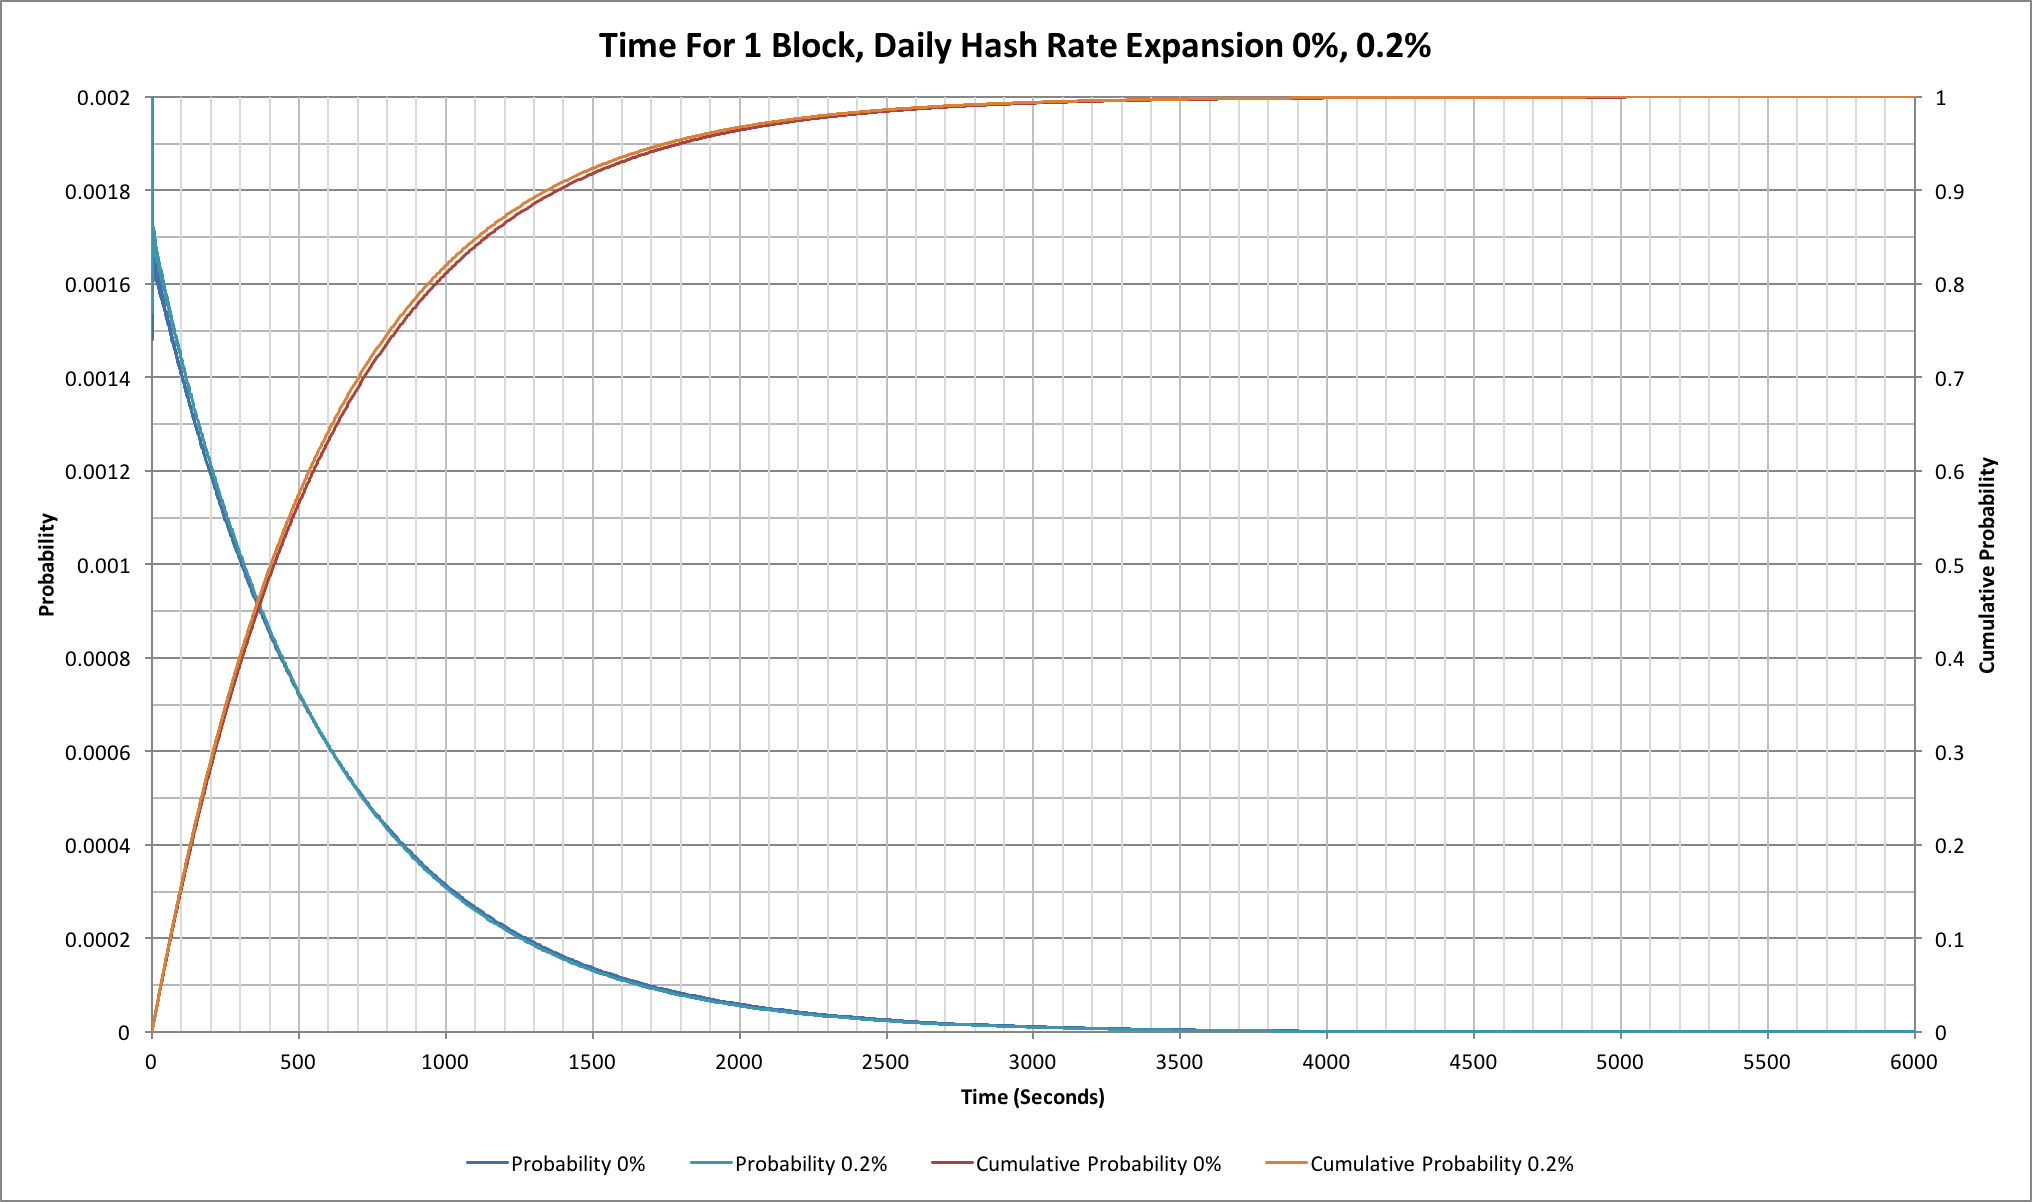 Comparison of probabilities for finding a Bitcoin block with 0% and 0.2% per day hash rate expansion